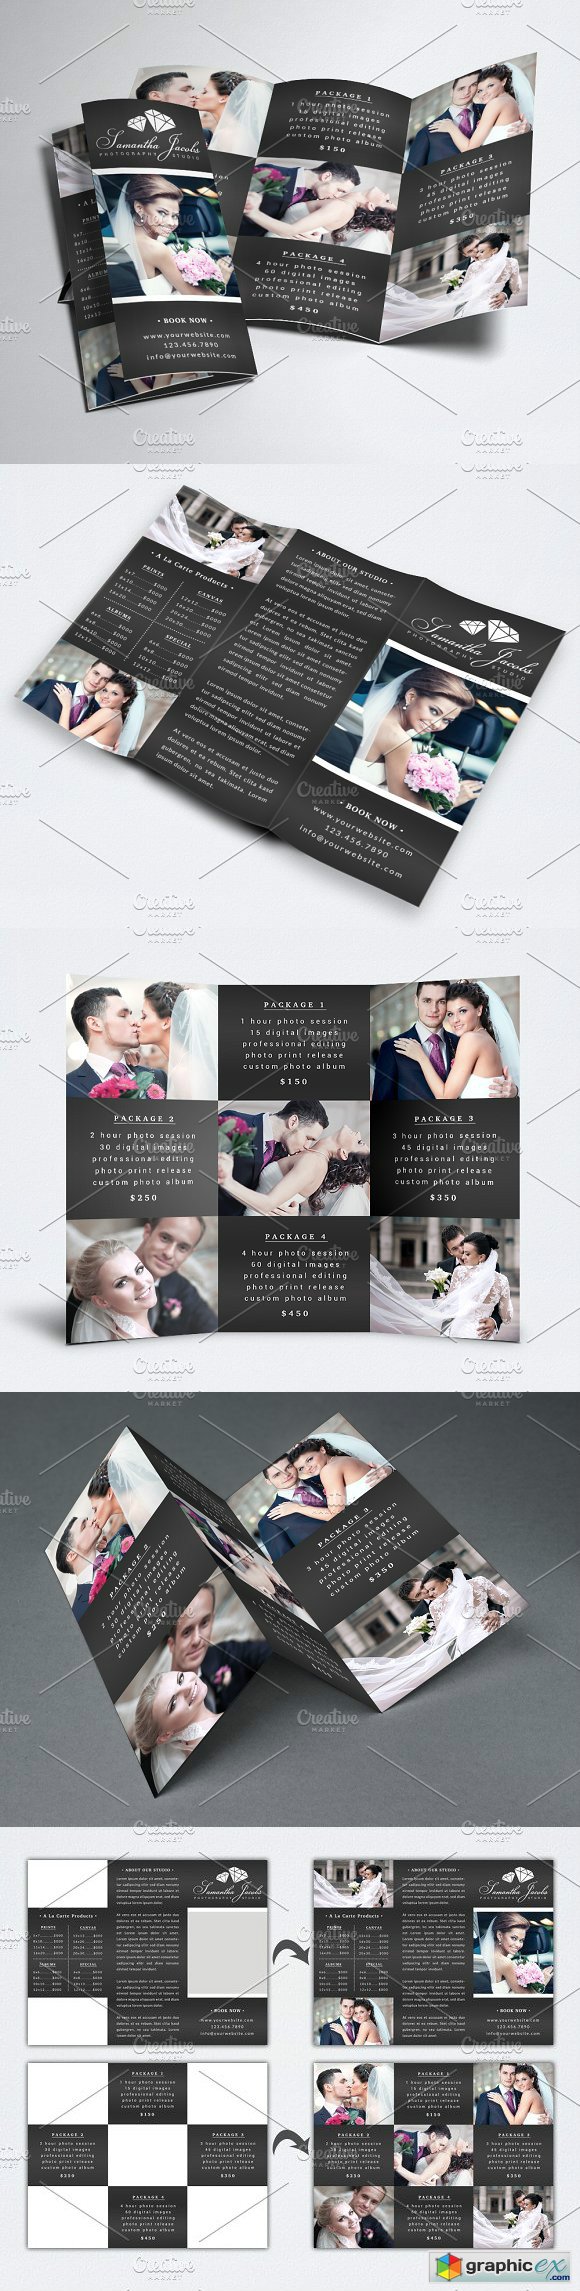 Photography Trifold Brochure Template 1160787